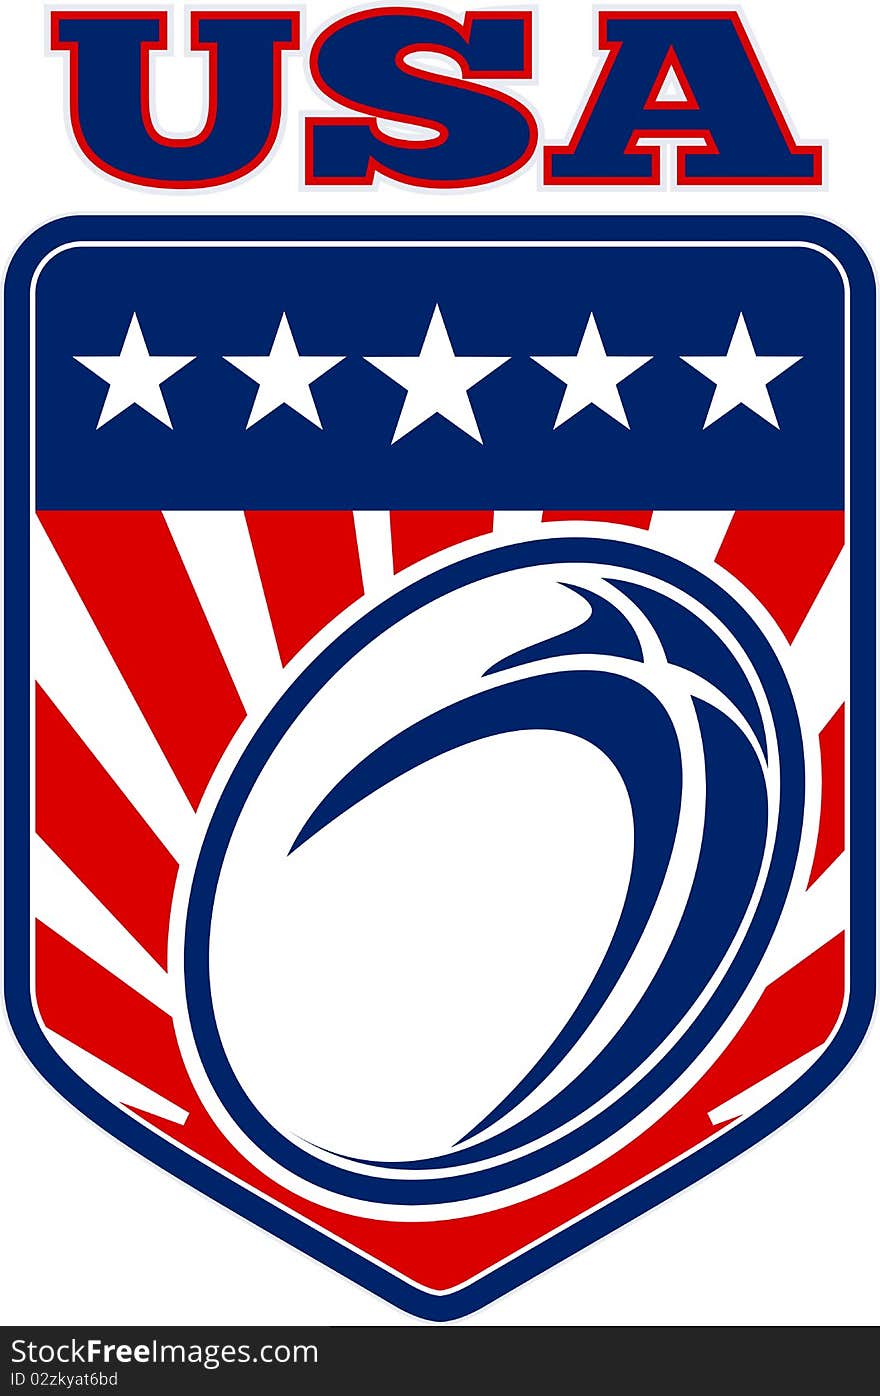 Illustration of a rugby ball with stars stripes and sunburst set inside shield with words USA united staes of america. Illustration of a rugby ball with stars stripes and sunburst set inside shield with words USA united staes of america